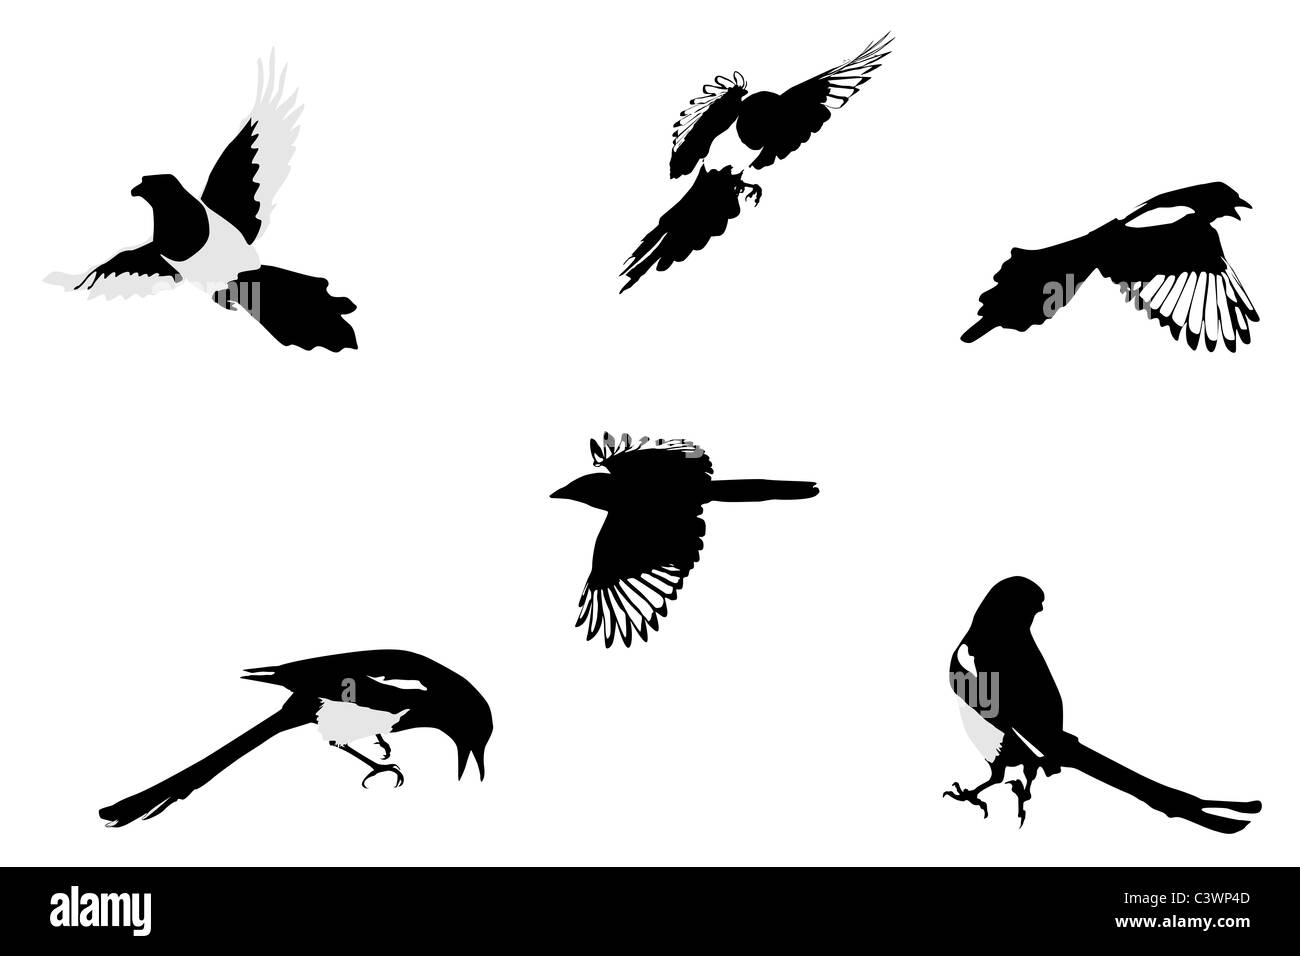 magpies illustration, collection Stock Photo